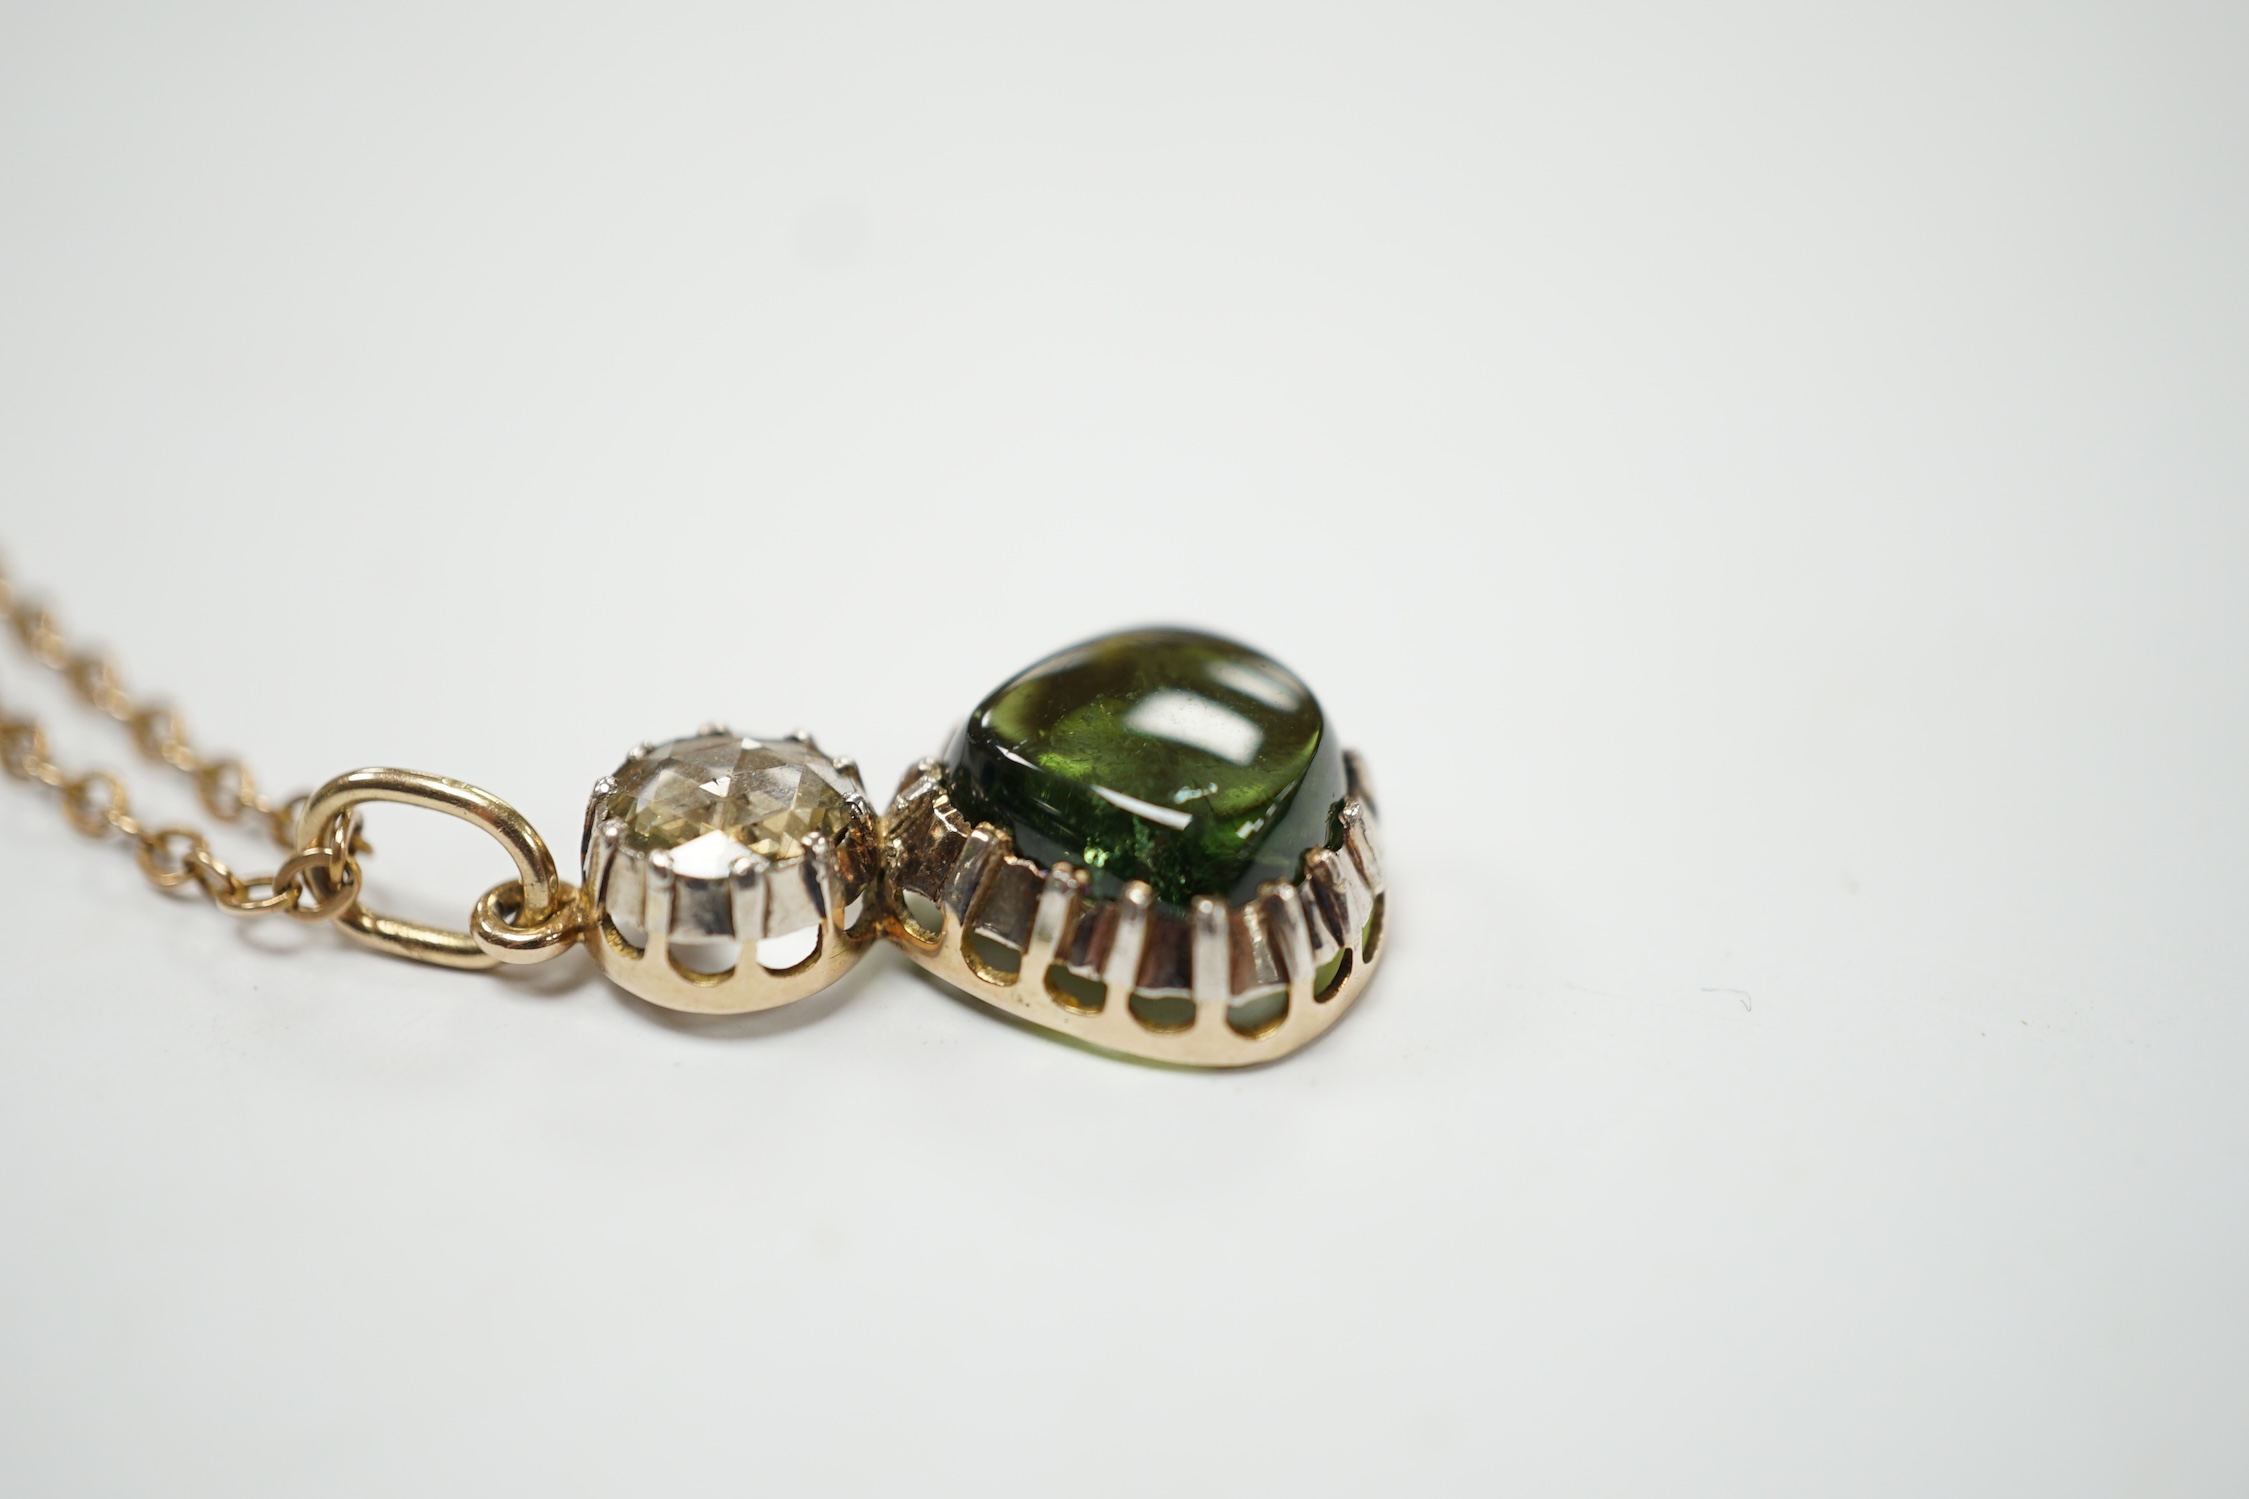 A Georgian yellow and white metal, rose cut diamond and shaped cabochon green tourmaline set pendant, 24mm, on a yellow metal chain, 48cm, gross weight 5.8 grams. Fair condition.